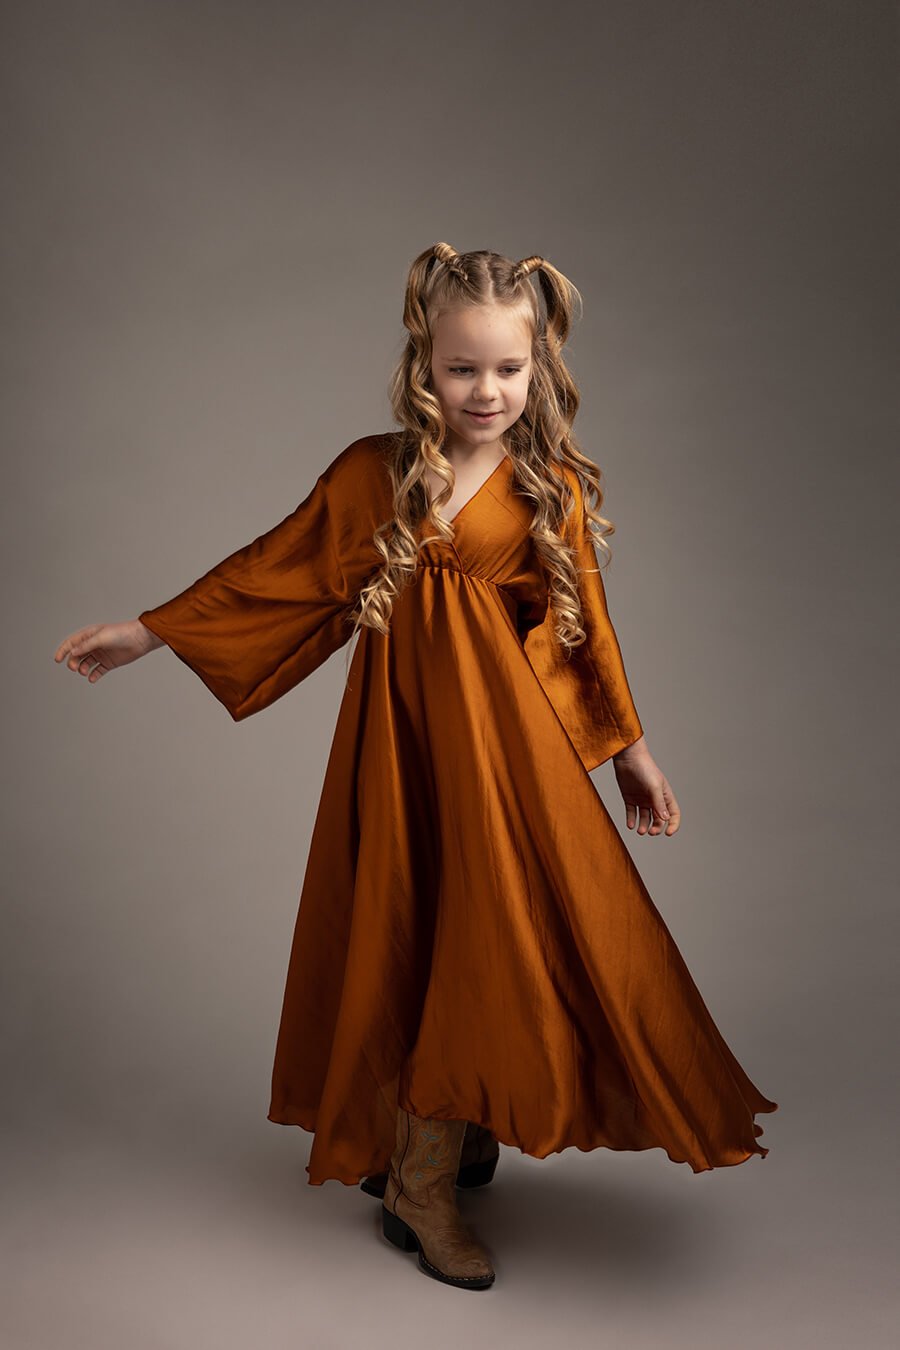 blond girl poses in a studio during a boho chic photoshoot. she is wearing a long silky cognac dress in a boho chic style and wears boots to match the look. 